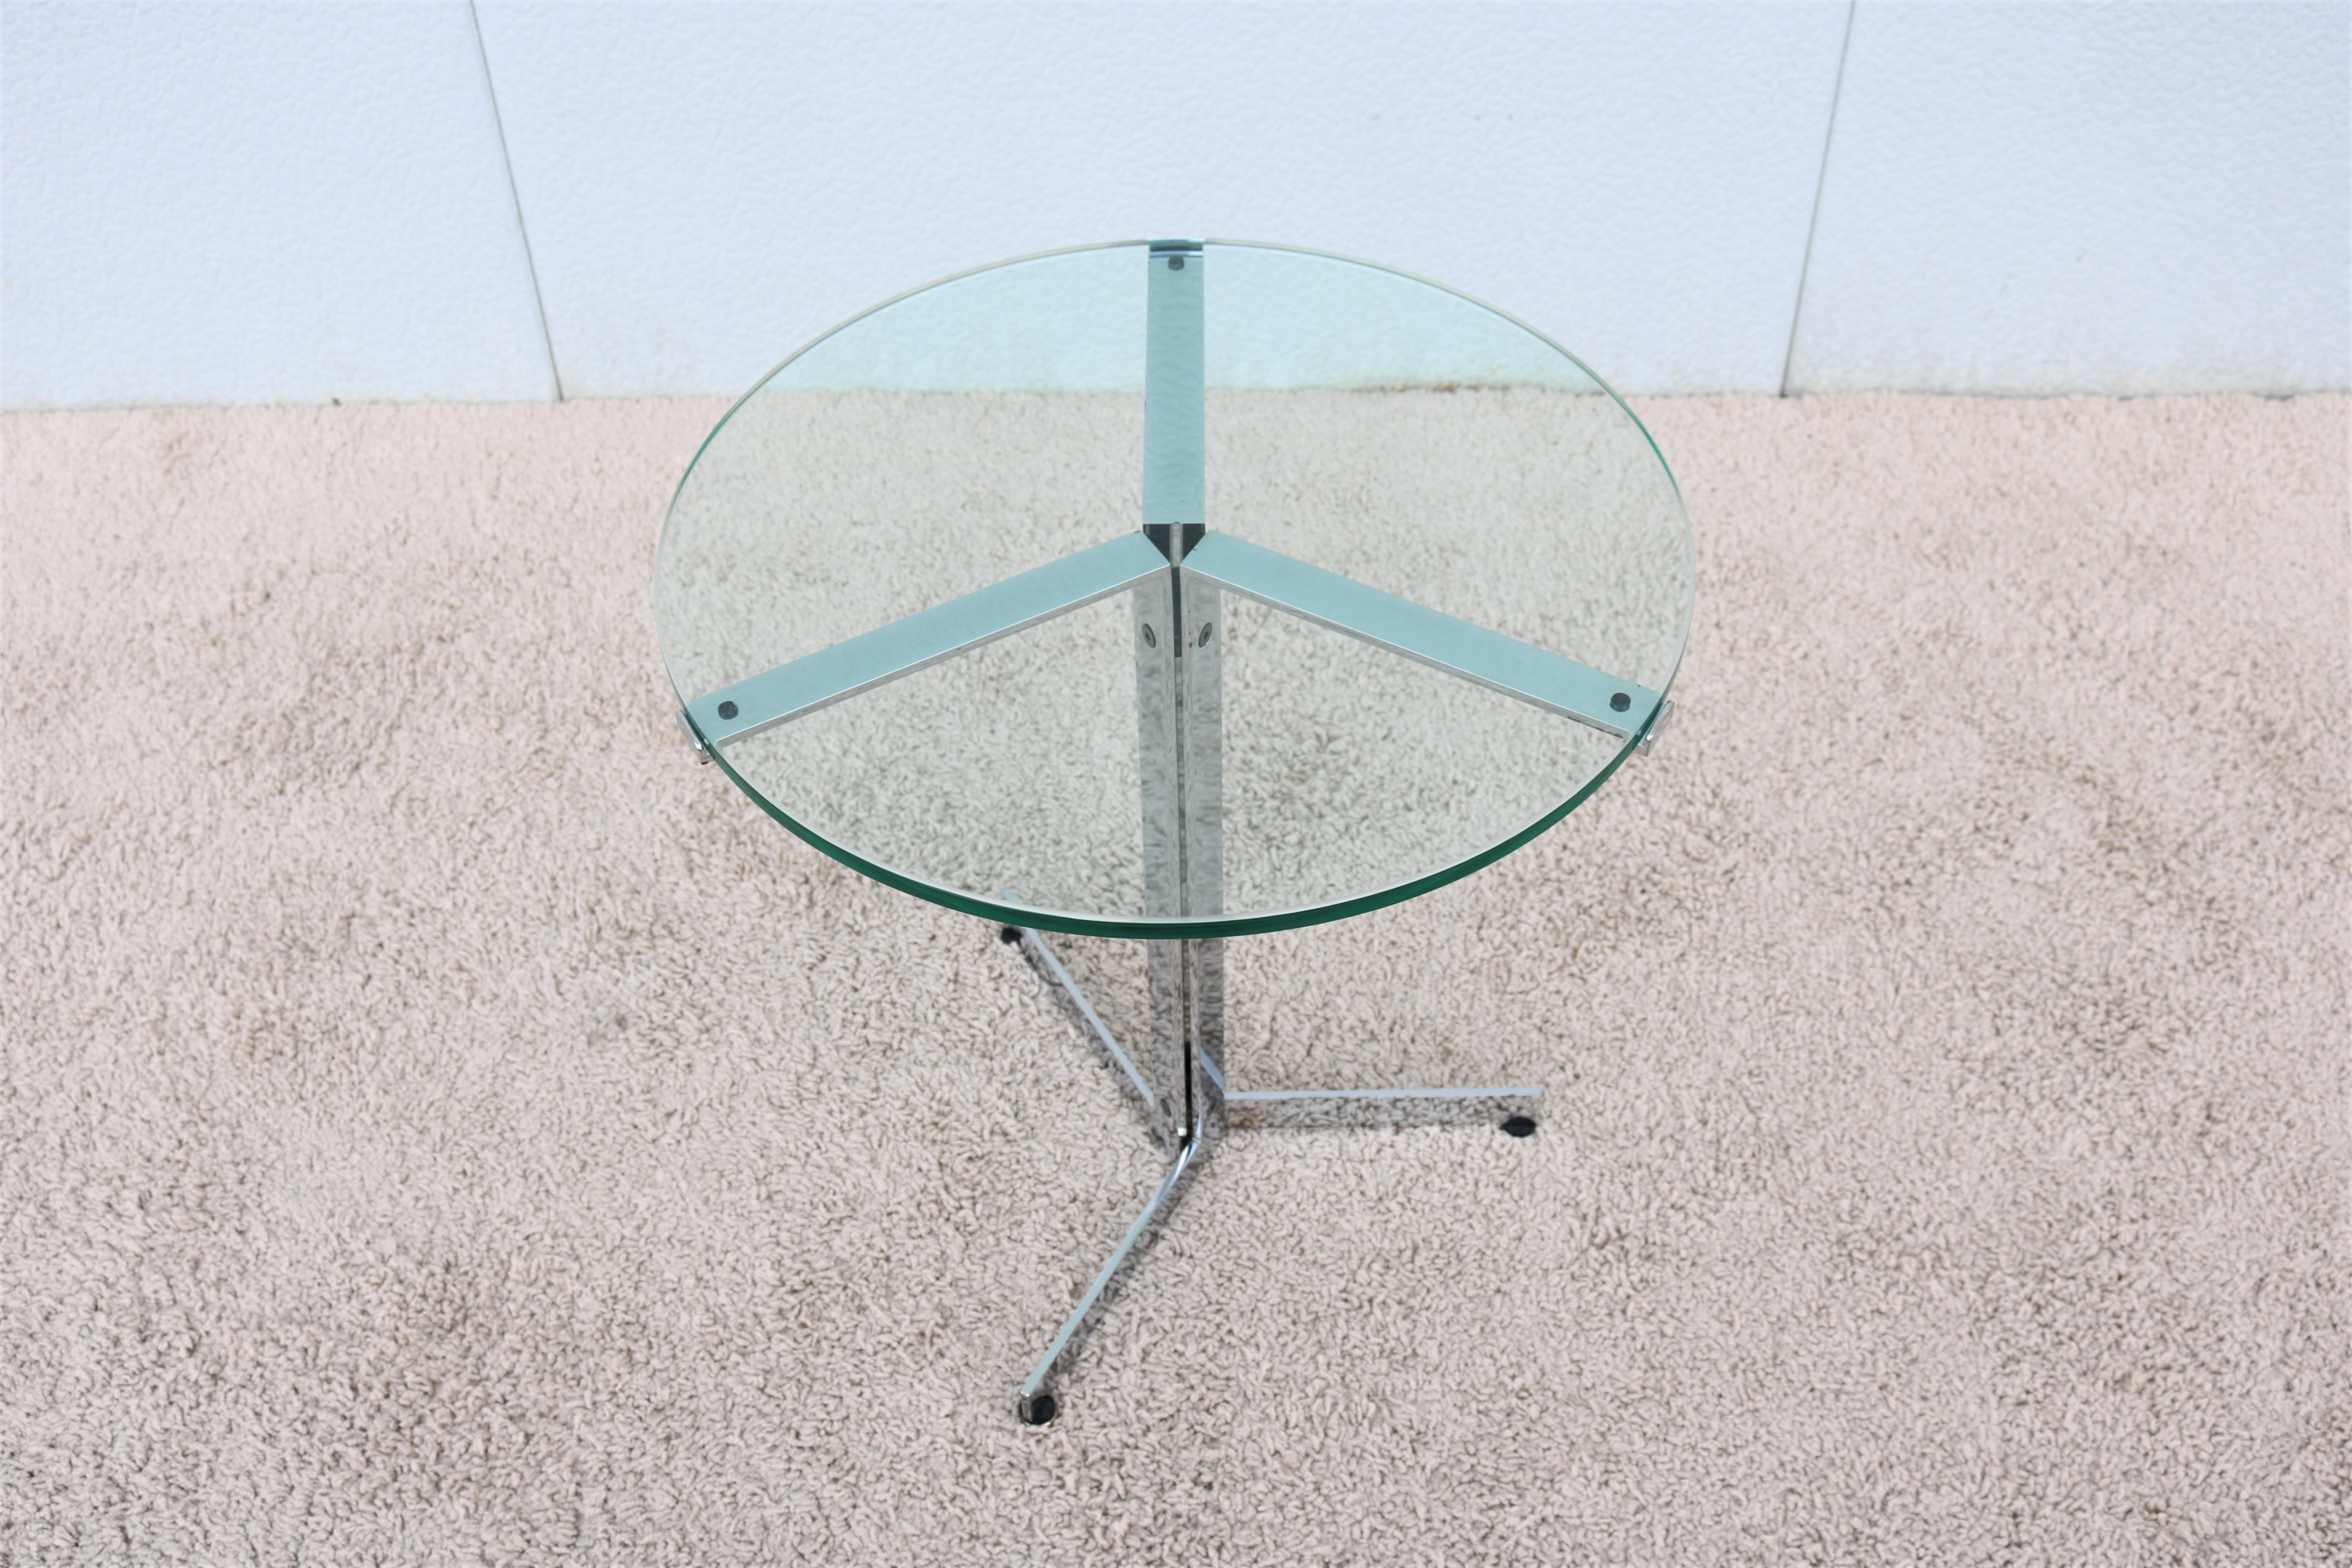 A classic timeless Mid-Century modern design by Swiss architect Hans Eichenberger for Strassle.
An elegant Alpha occasional side table with polished chromed steel base and 1/2